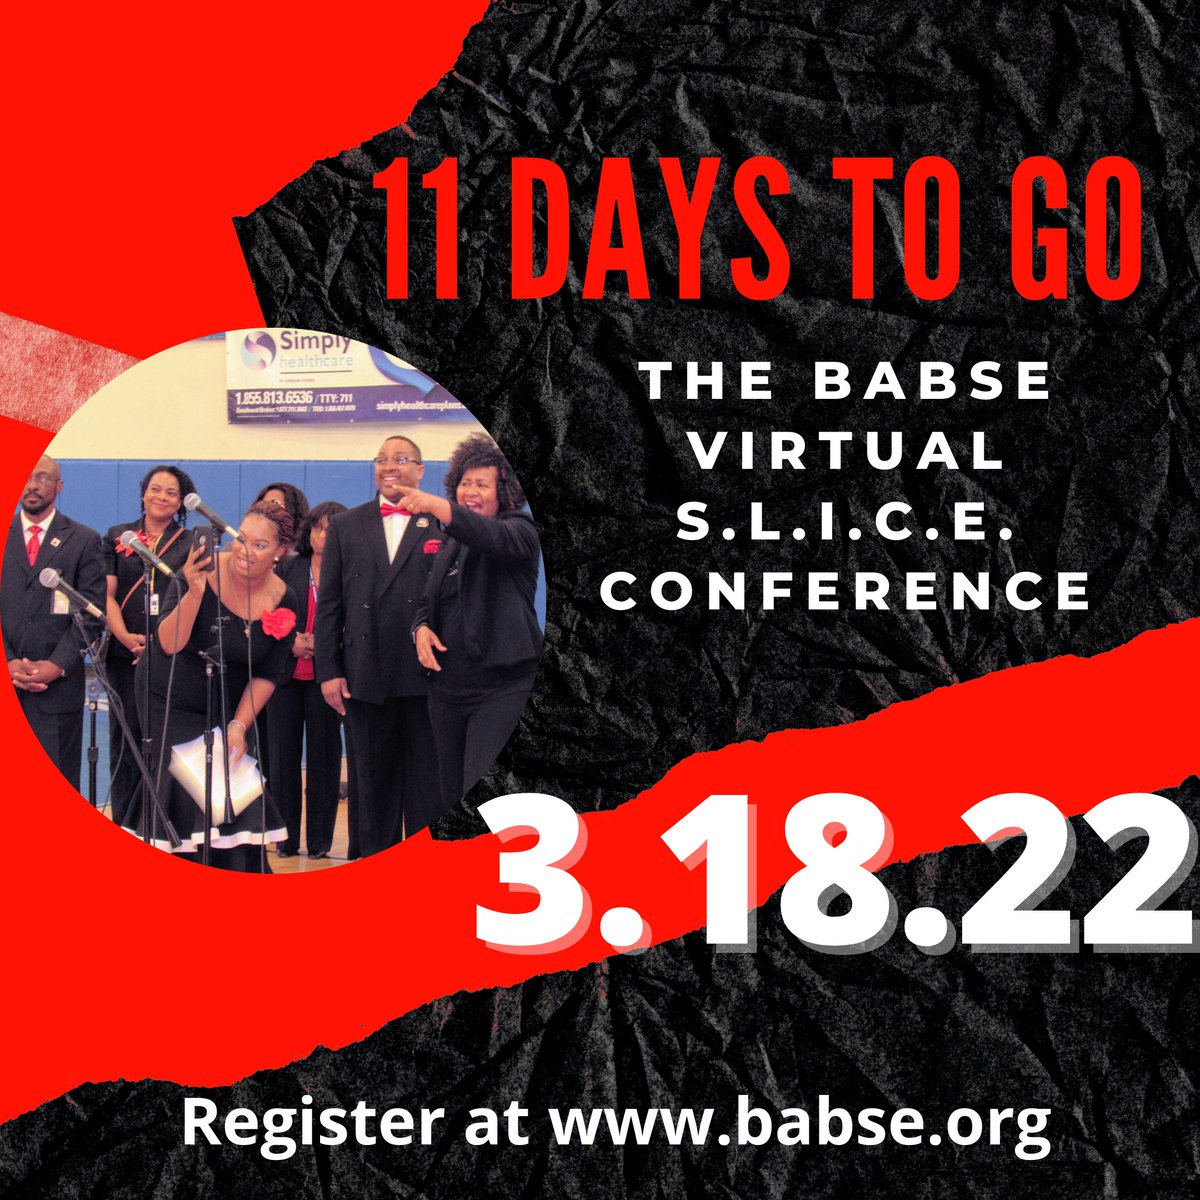 11 days to go! Register NOW for the Virtual SLICE Conference @TABSE_Texas @TheGoldNTeacher @NABSE_org @MizzouEdNABSE @GarlandABSE @NCNY_ABSE @DK_BlackburnNYC @DrMarkQuintana @MDCPS @pbcsd @YouthAlertYA @5000RoleBCPS @ULBroward @UrbanLeague @Hot105